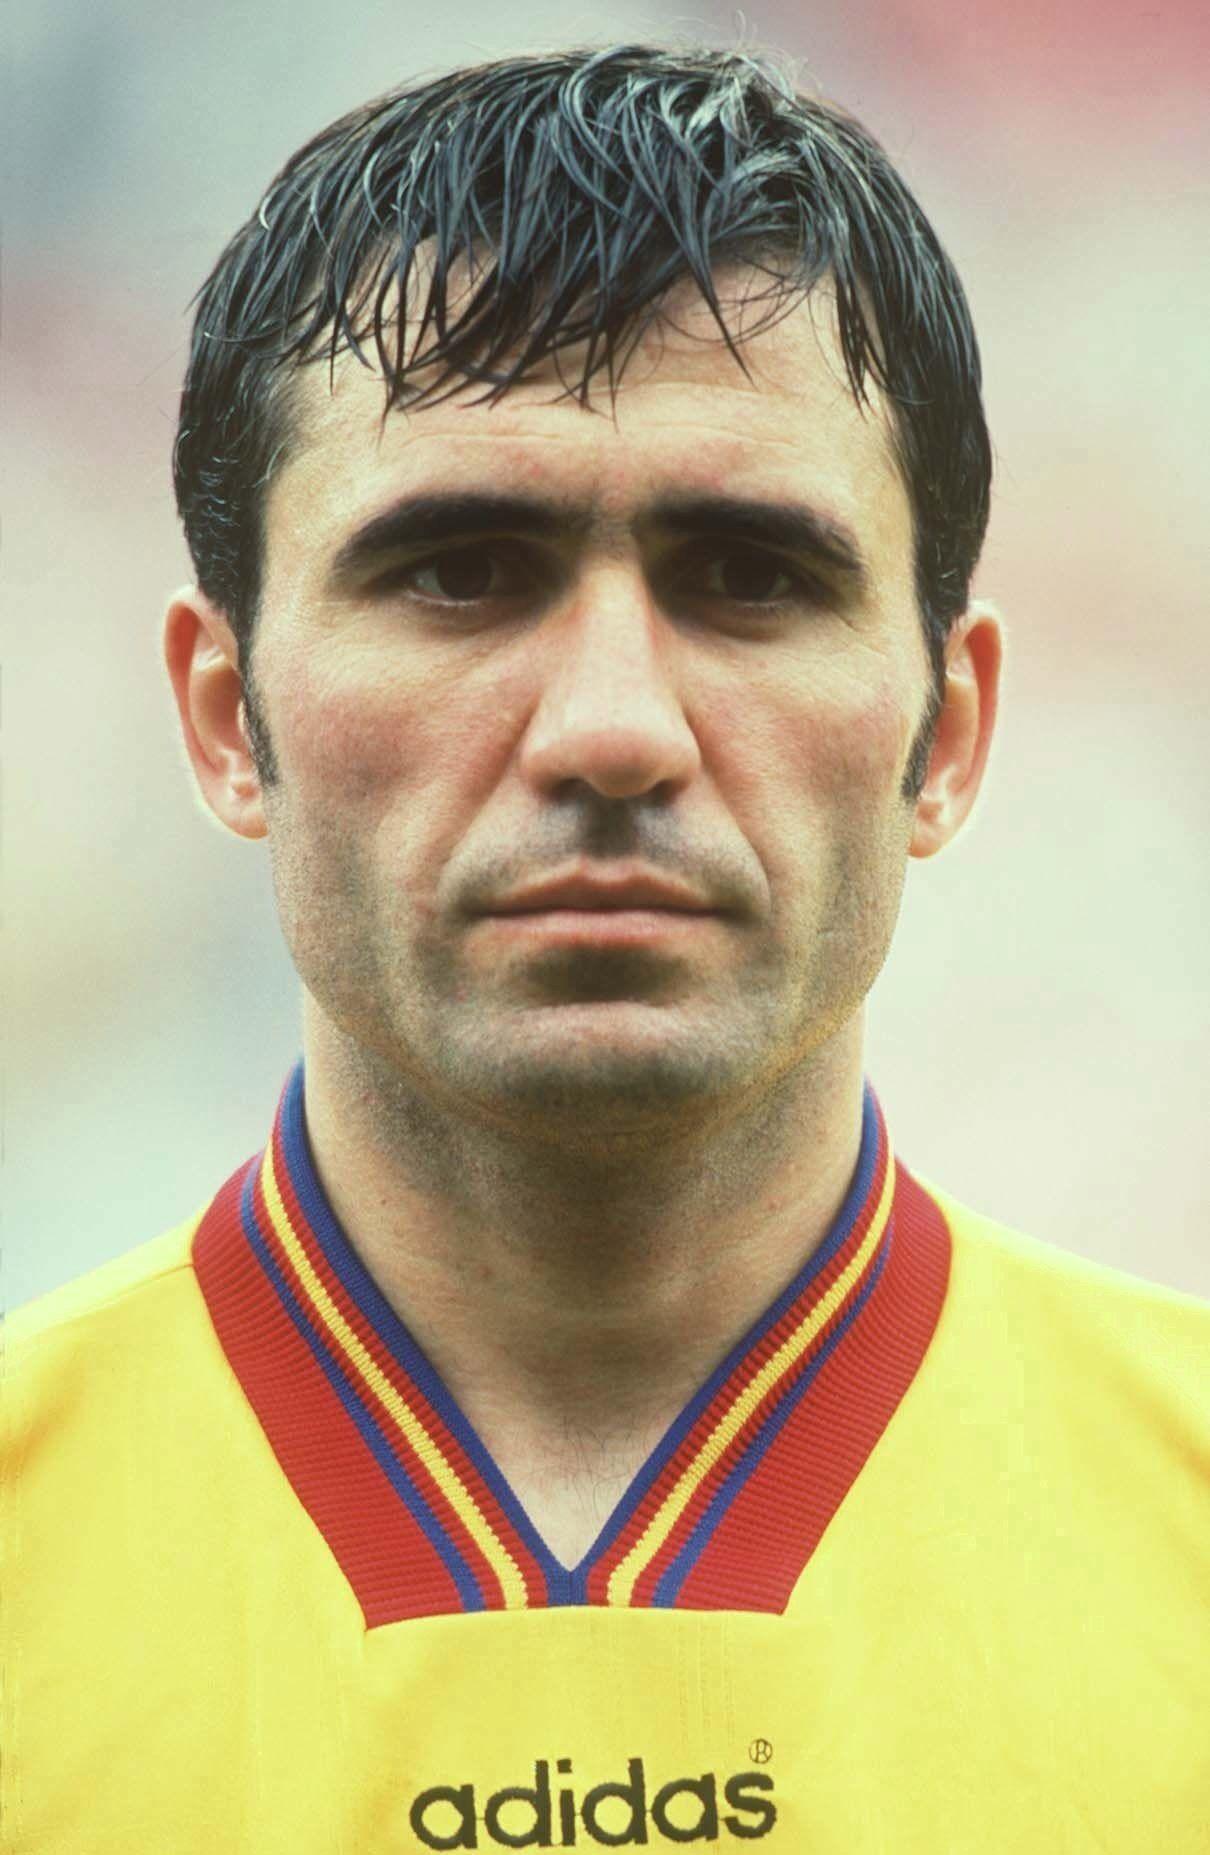 Gheorghe Hagi. Saw him play versus Wales in Cardiff when